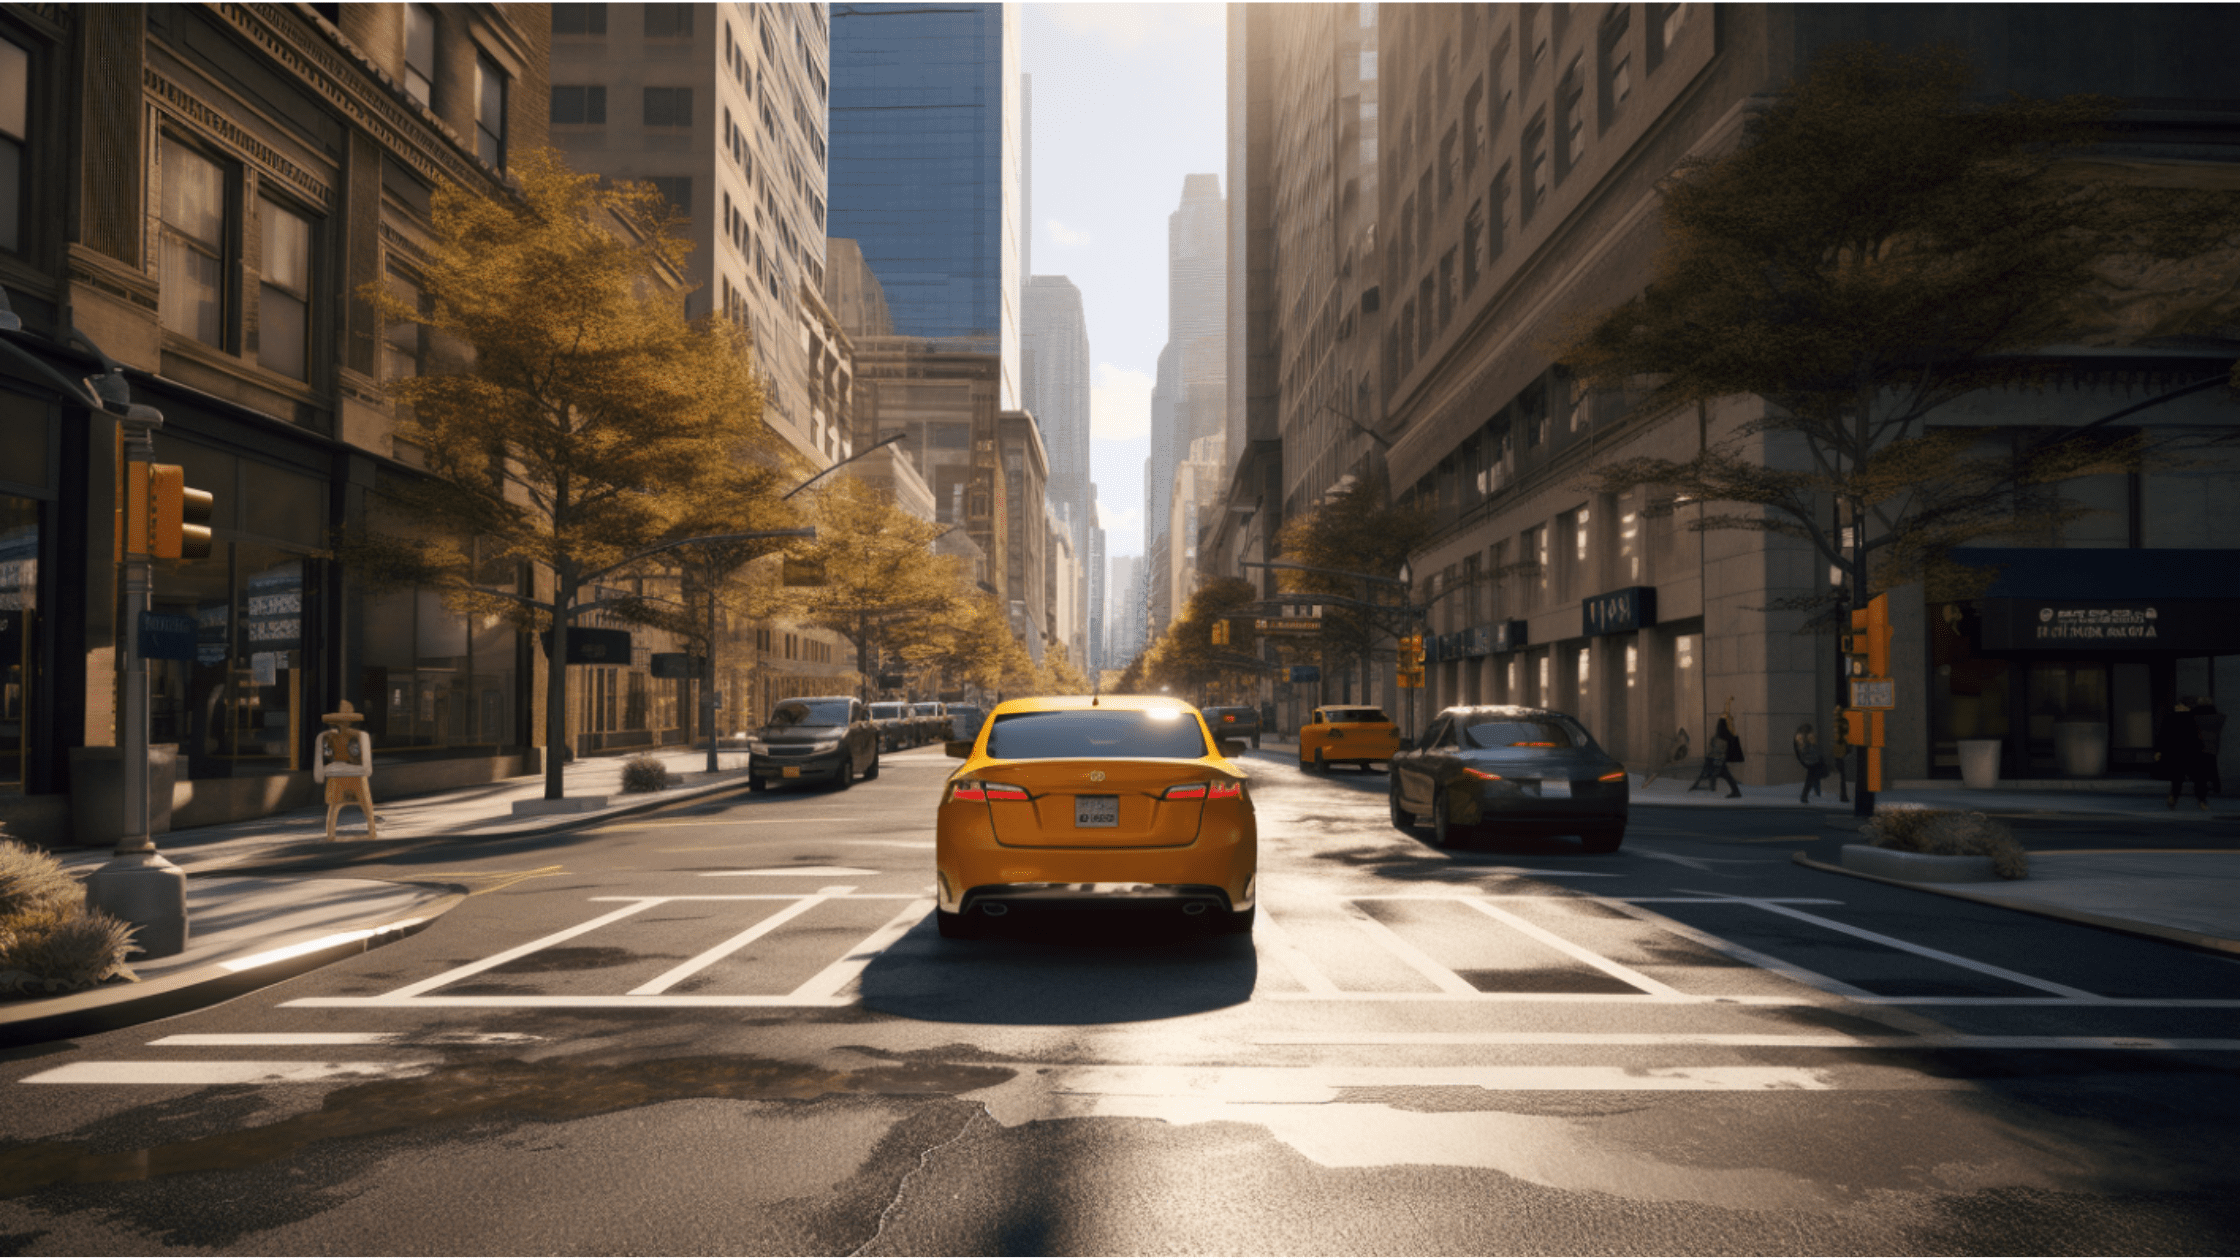 Experience the thrill of driving a yellow Uber vehicle on the open road. Discover the freedom, flexibility, and earning potential of becoming an Uber driver.